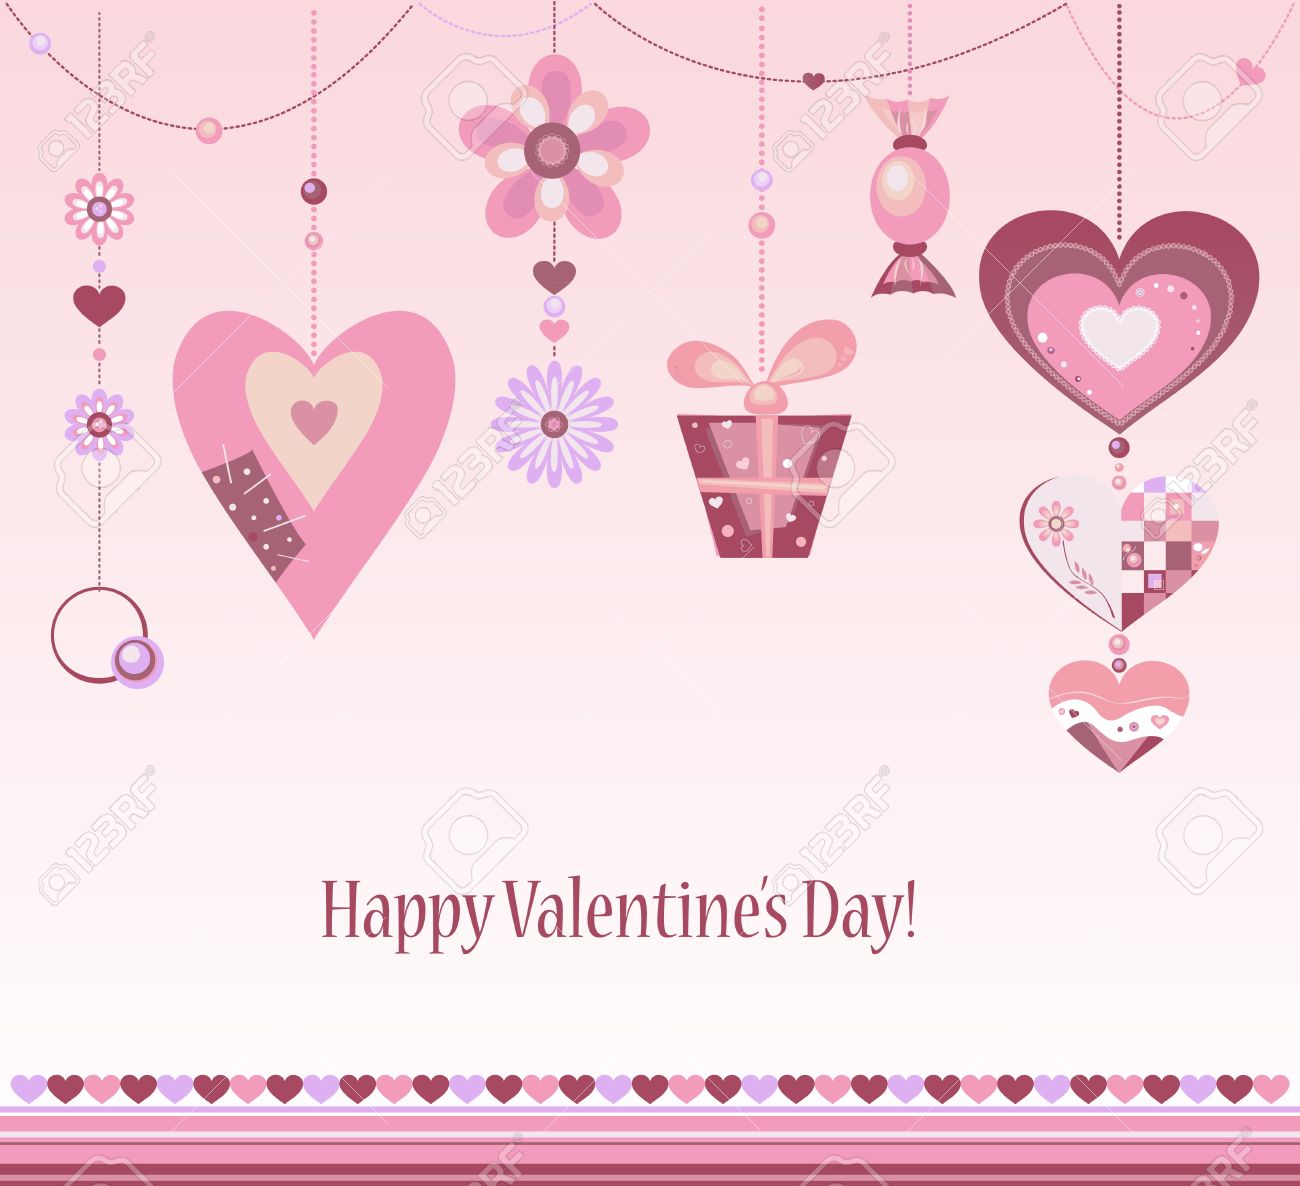 happy valentines day clipart flowers - Clipground1300 x 1186